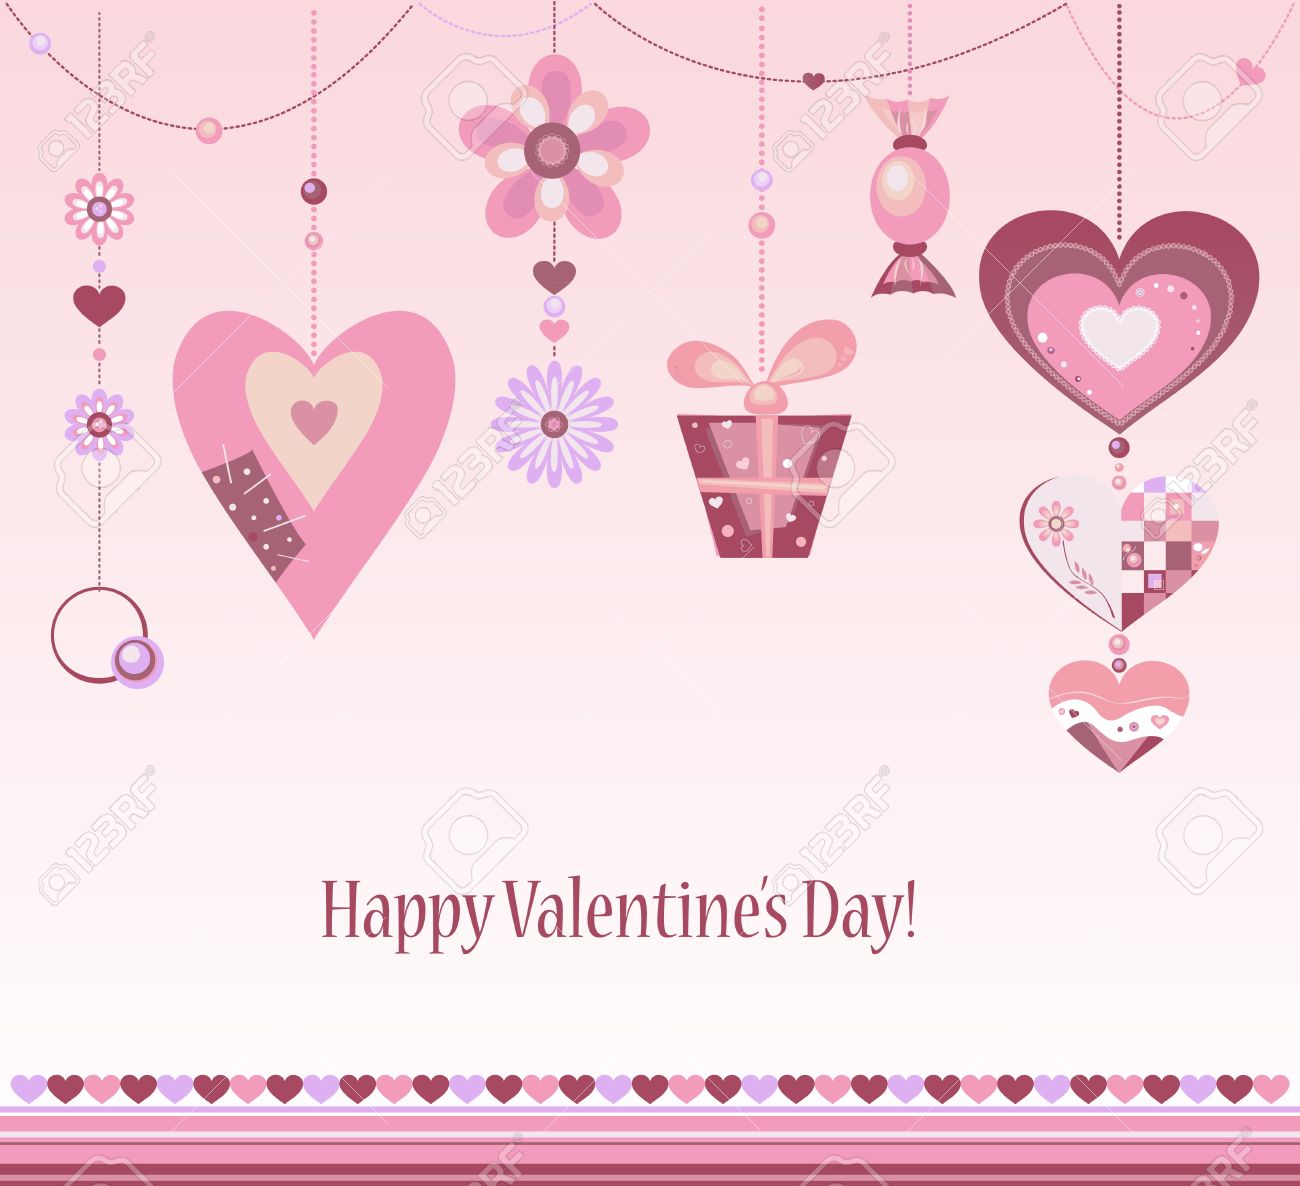 happy valentines day clipart flowers - Clipground1300 x 1186